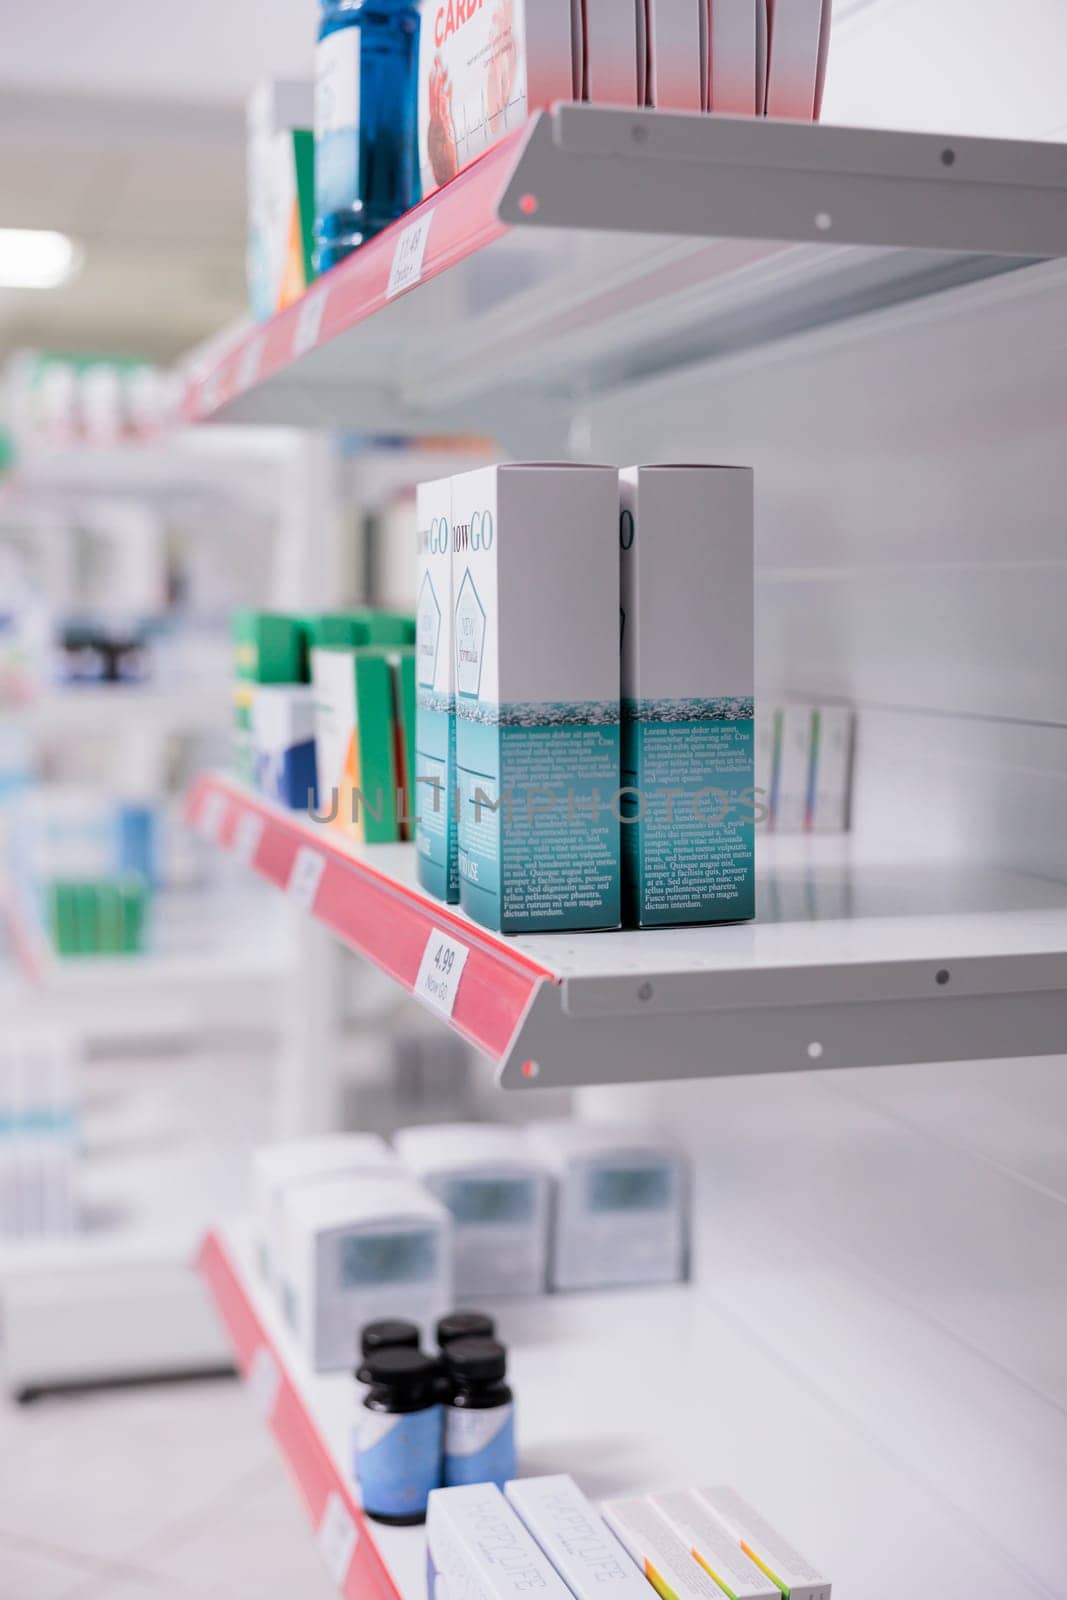 Selective focus of drugstore shelves filled with vitamins and pharmaceutical products to sell prescription medicine by DCStudio